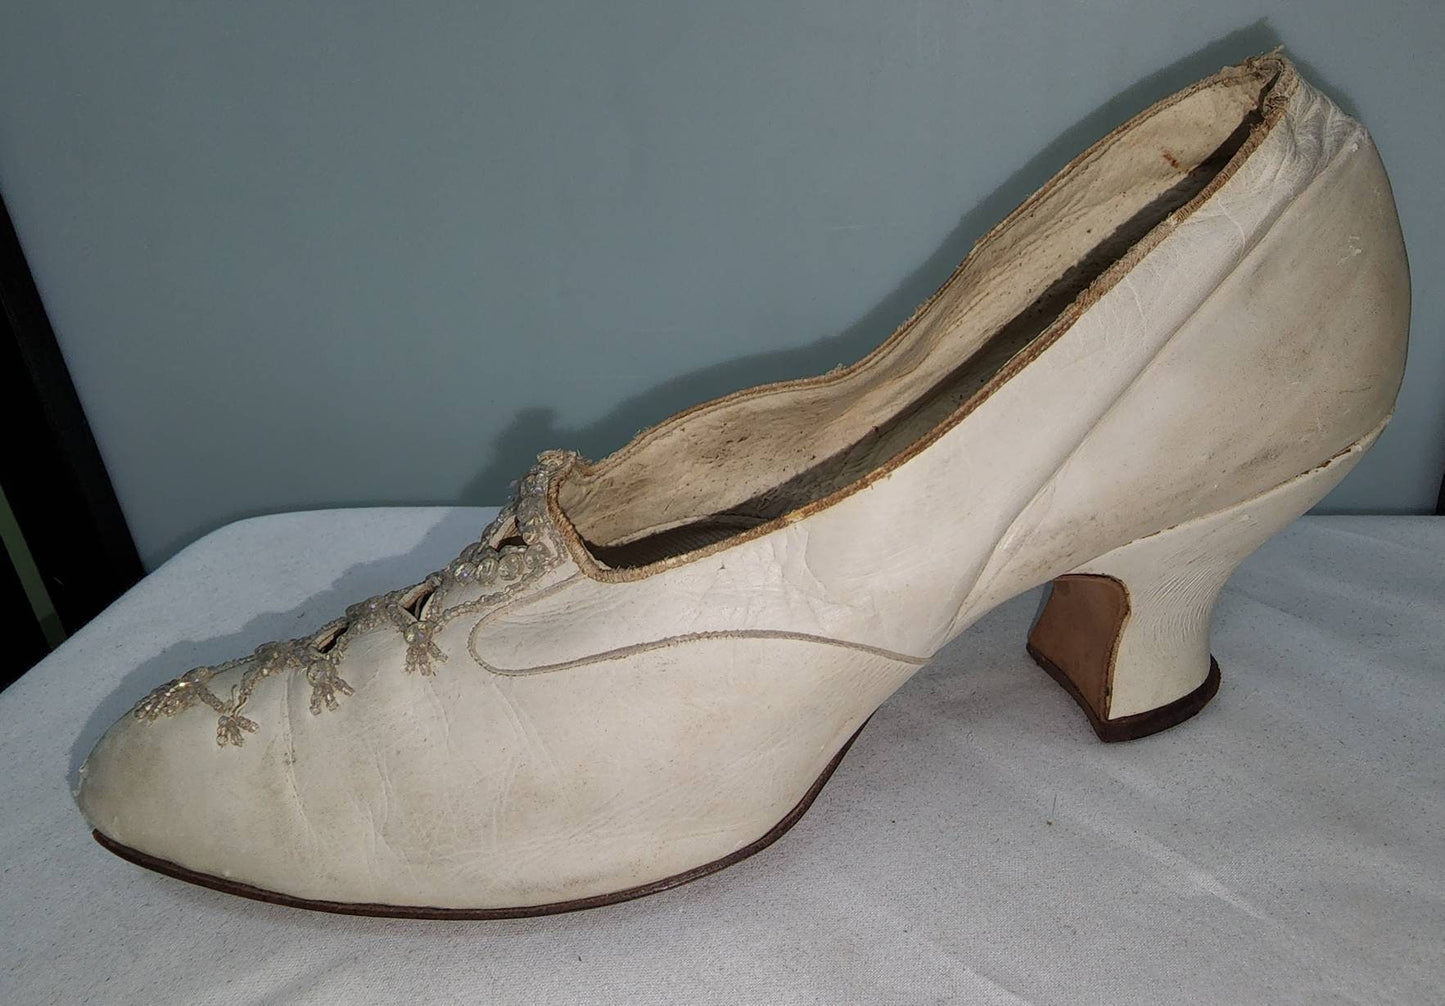 Antique Kidskin Shoes 1910s Cream Kidskin Beaded Pumps Open Cutouts Crystals Beads Low Heels Edwardian Wedding Shoes XS S